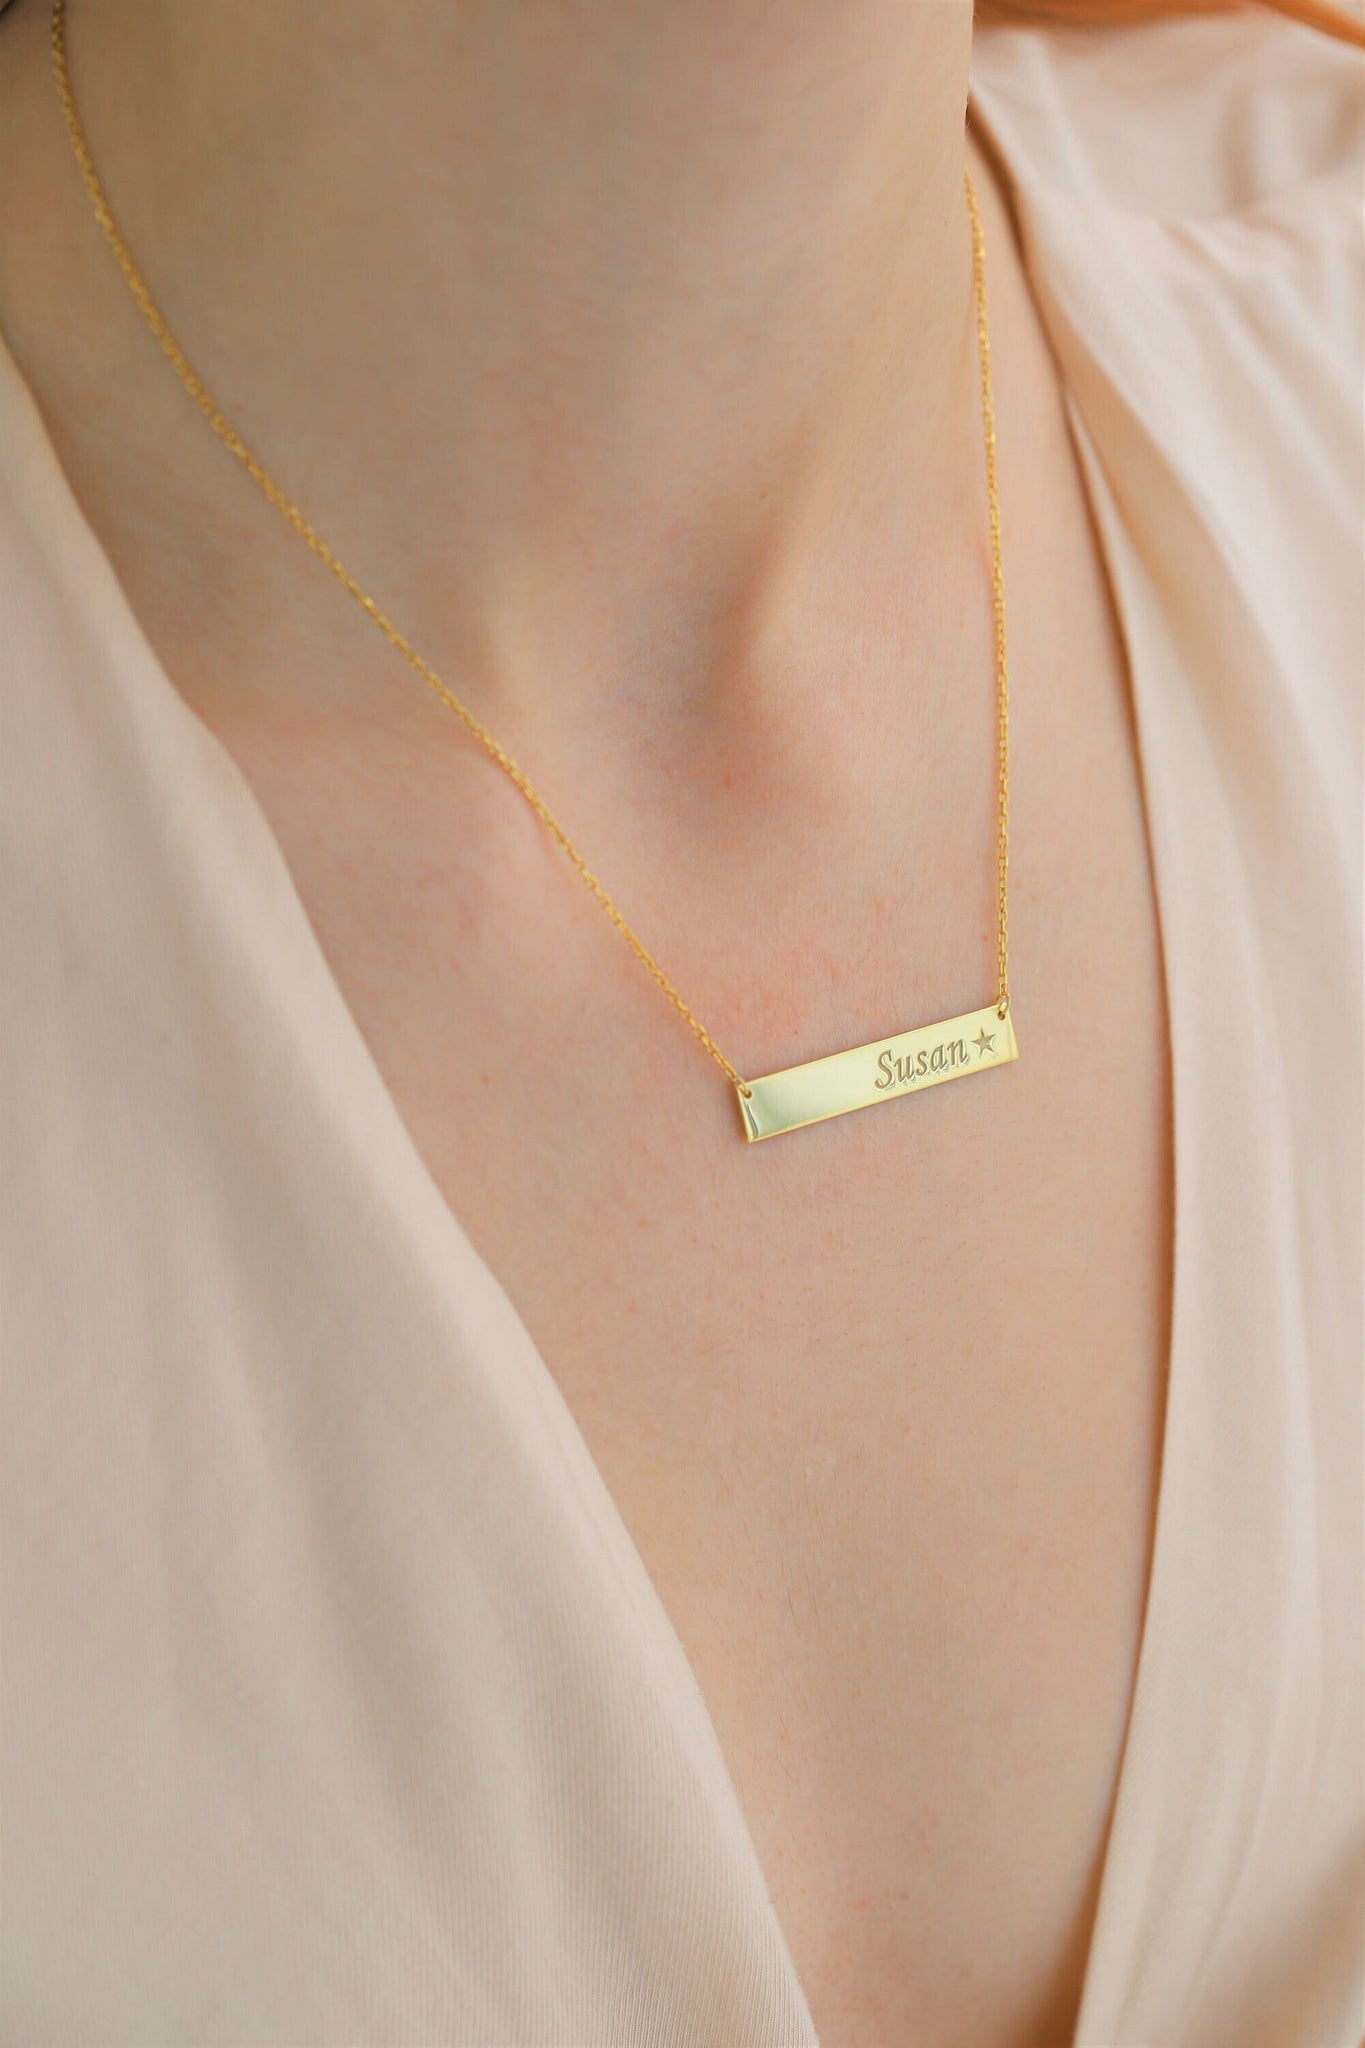 Name Bar Necklace, Gift For Mothers Day, Personalized Name Necklace, Mom Necklace, Minimalist Necklace, To My Mom Necklace,Monogram Necklace